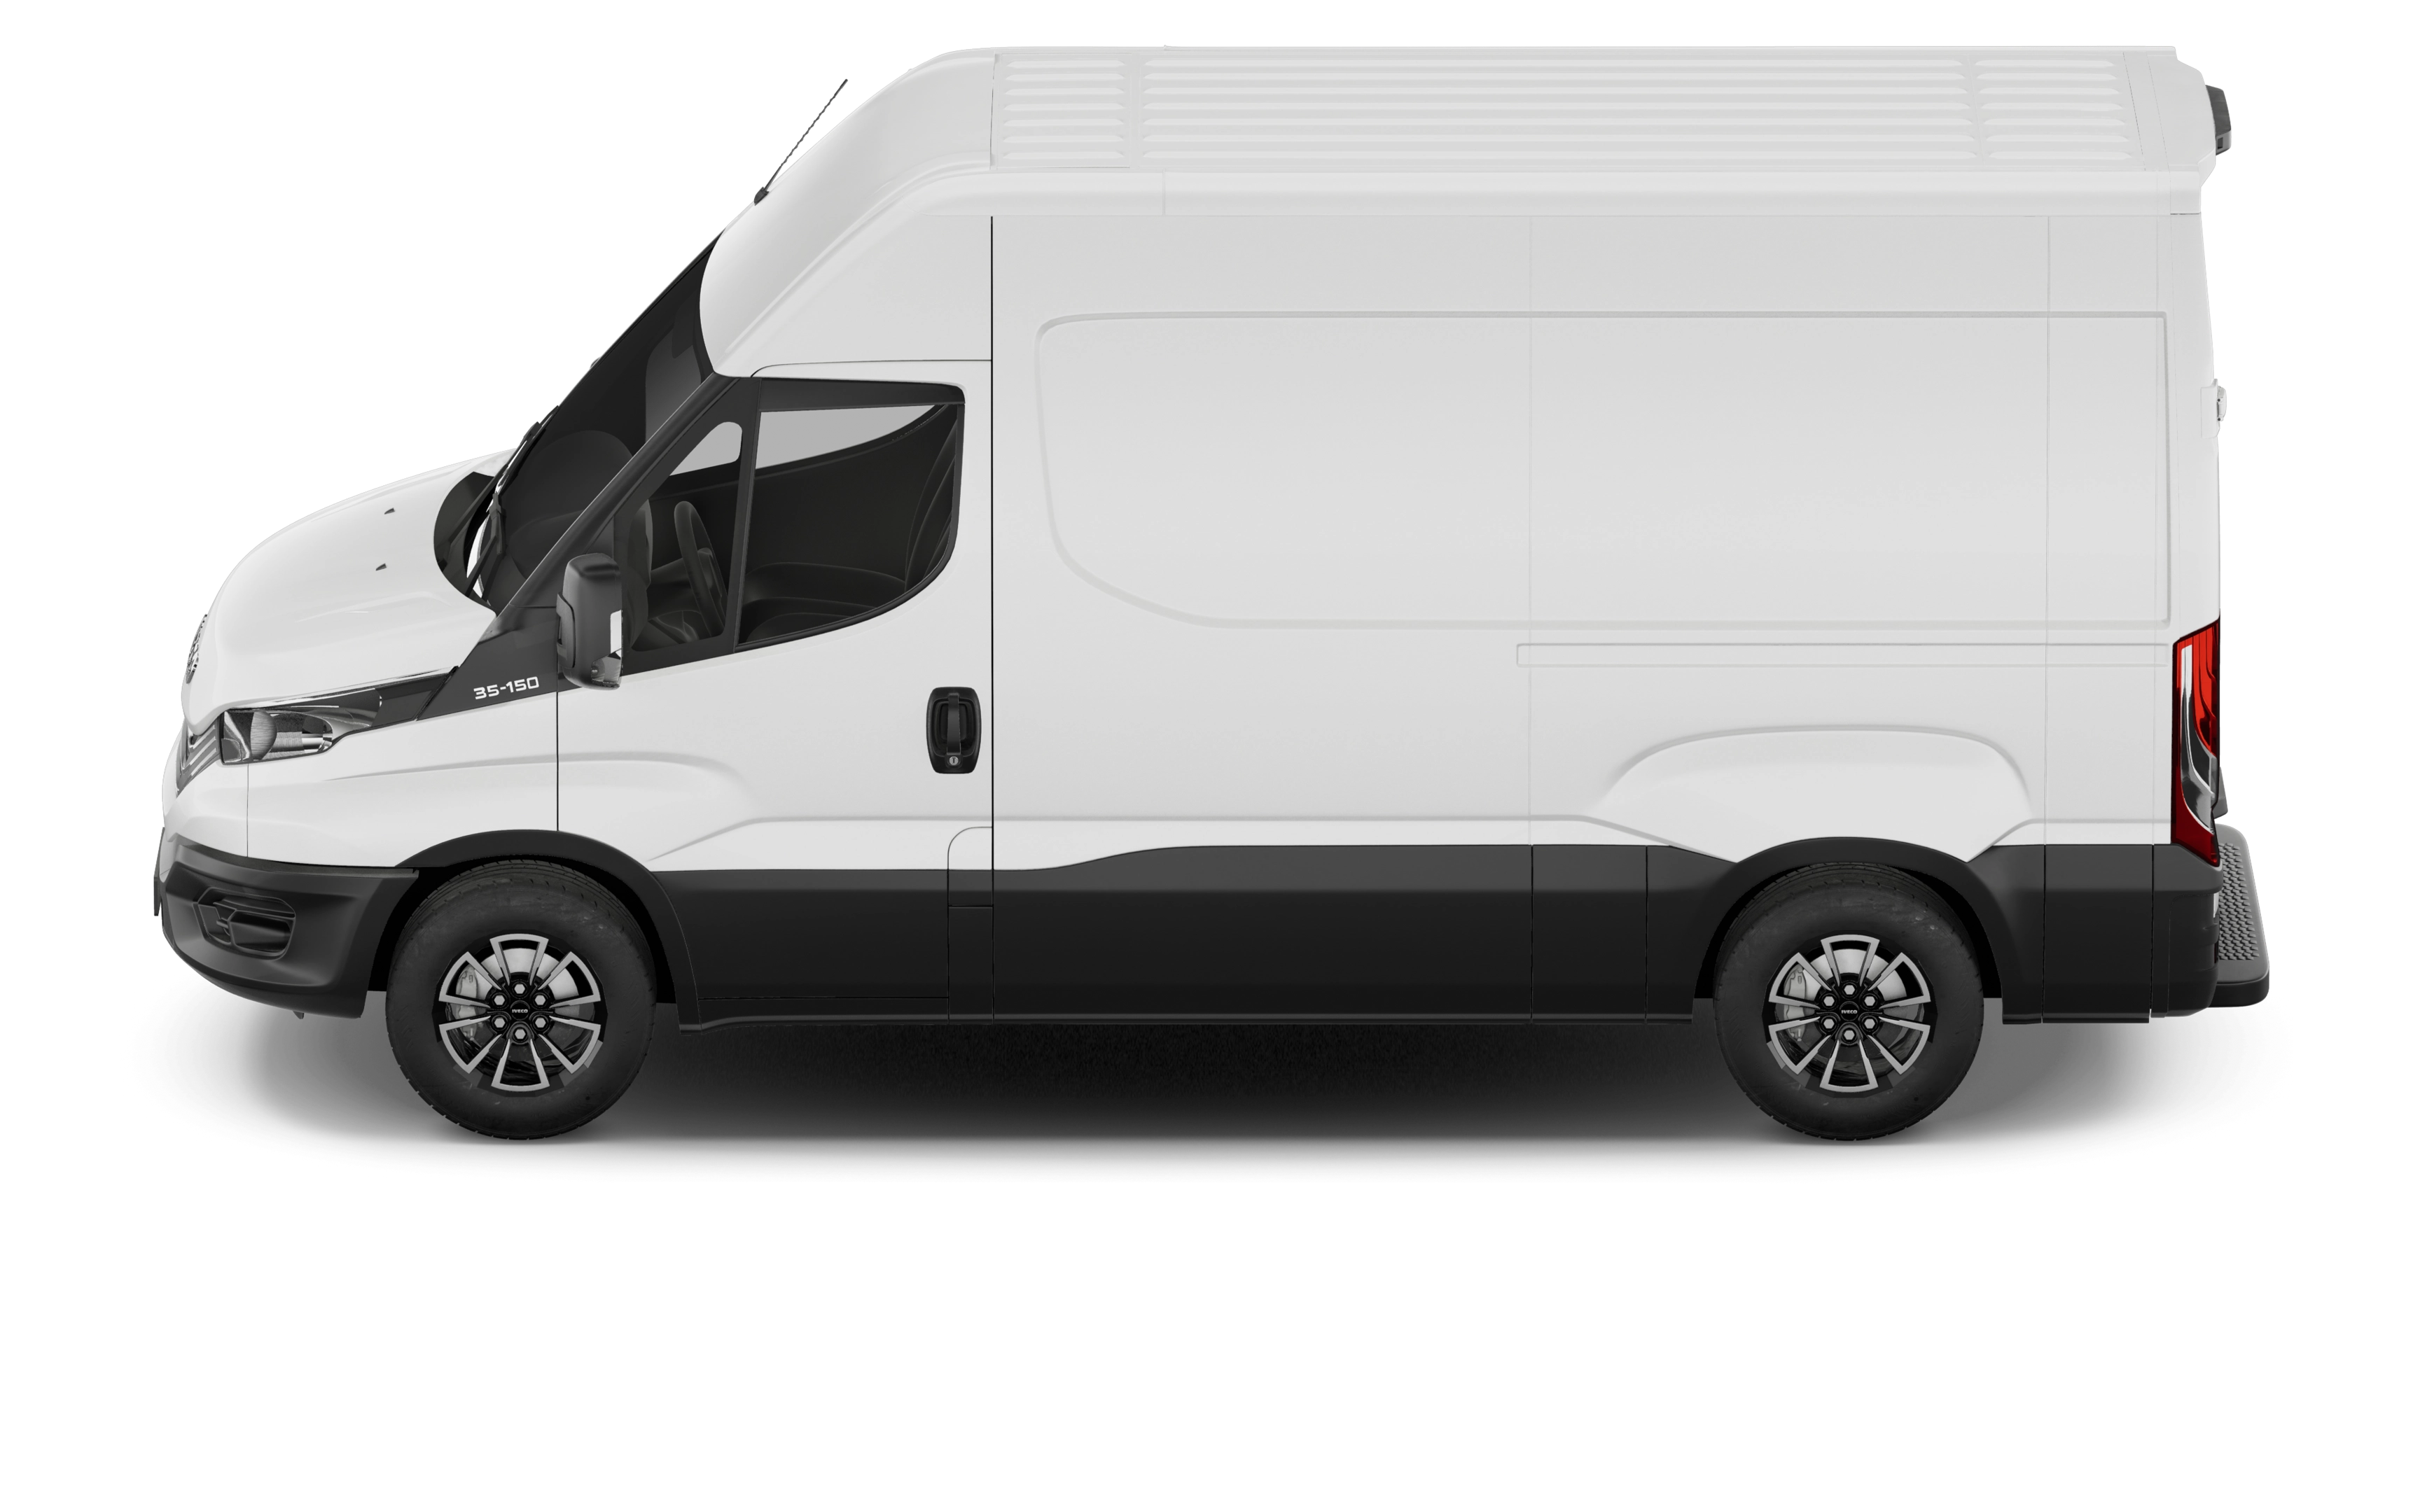 Iveco edaily 35s14 electric 140kw 74kwh extra high/rf van 4100 wb auto [22kw]